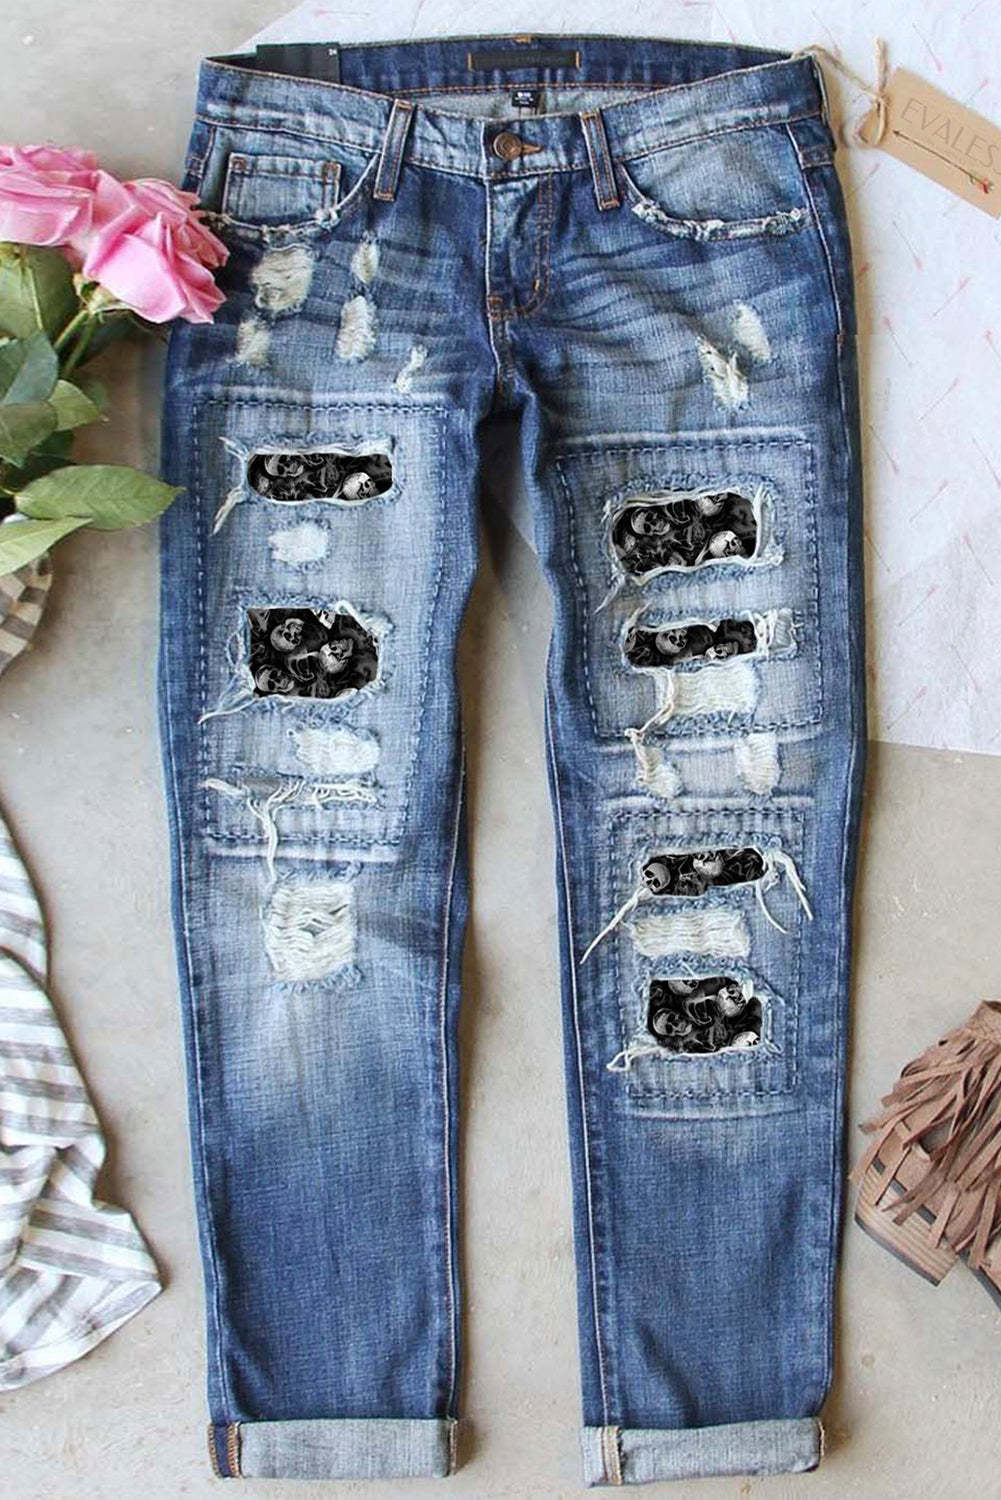 Blue Skull Print Button Pockets Ripped Jeans $ 39.99 - Evaless